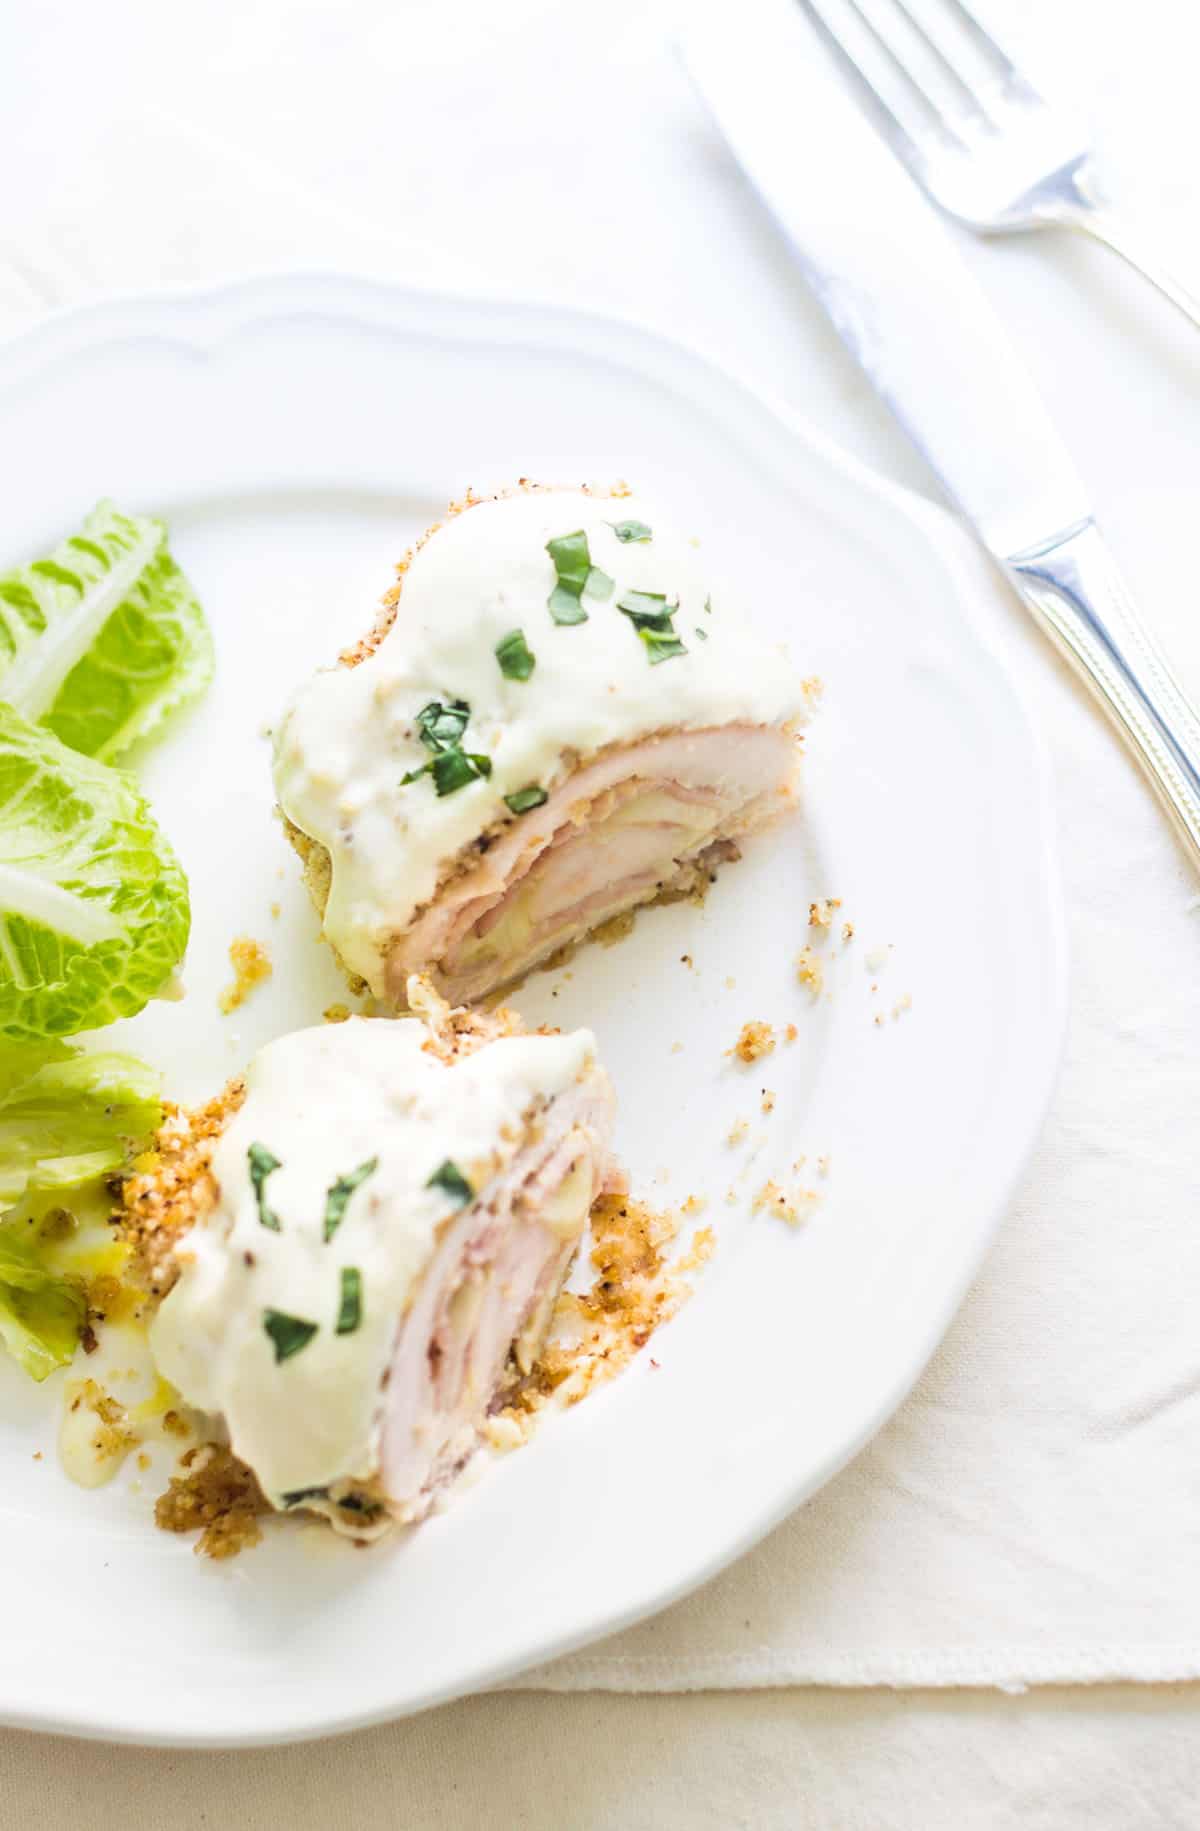 Chicken Cordon Bleu: an easy and quick French dinner! This classic is made with breaded chicken stuffed with ham and cheese. Topped with a dijon cream sauce. Recipe via MonPetitFour.com